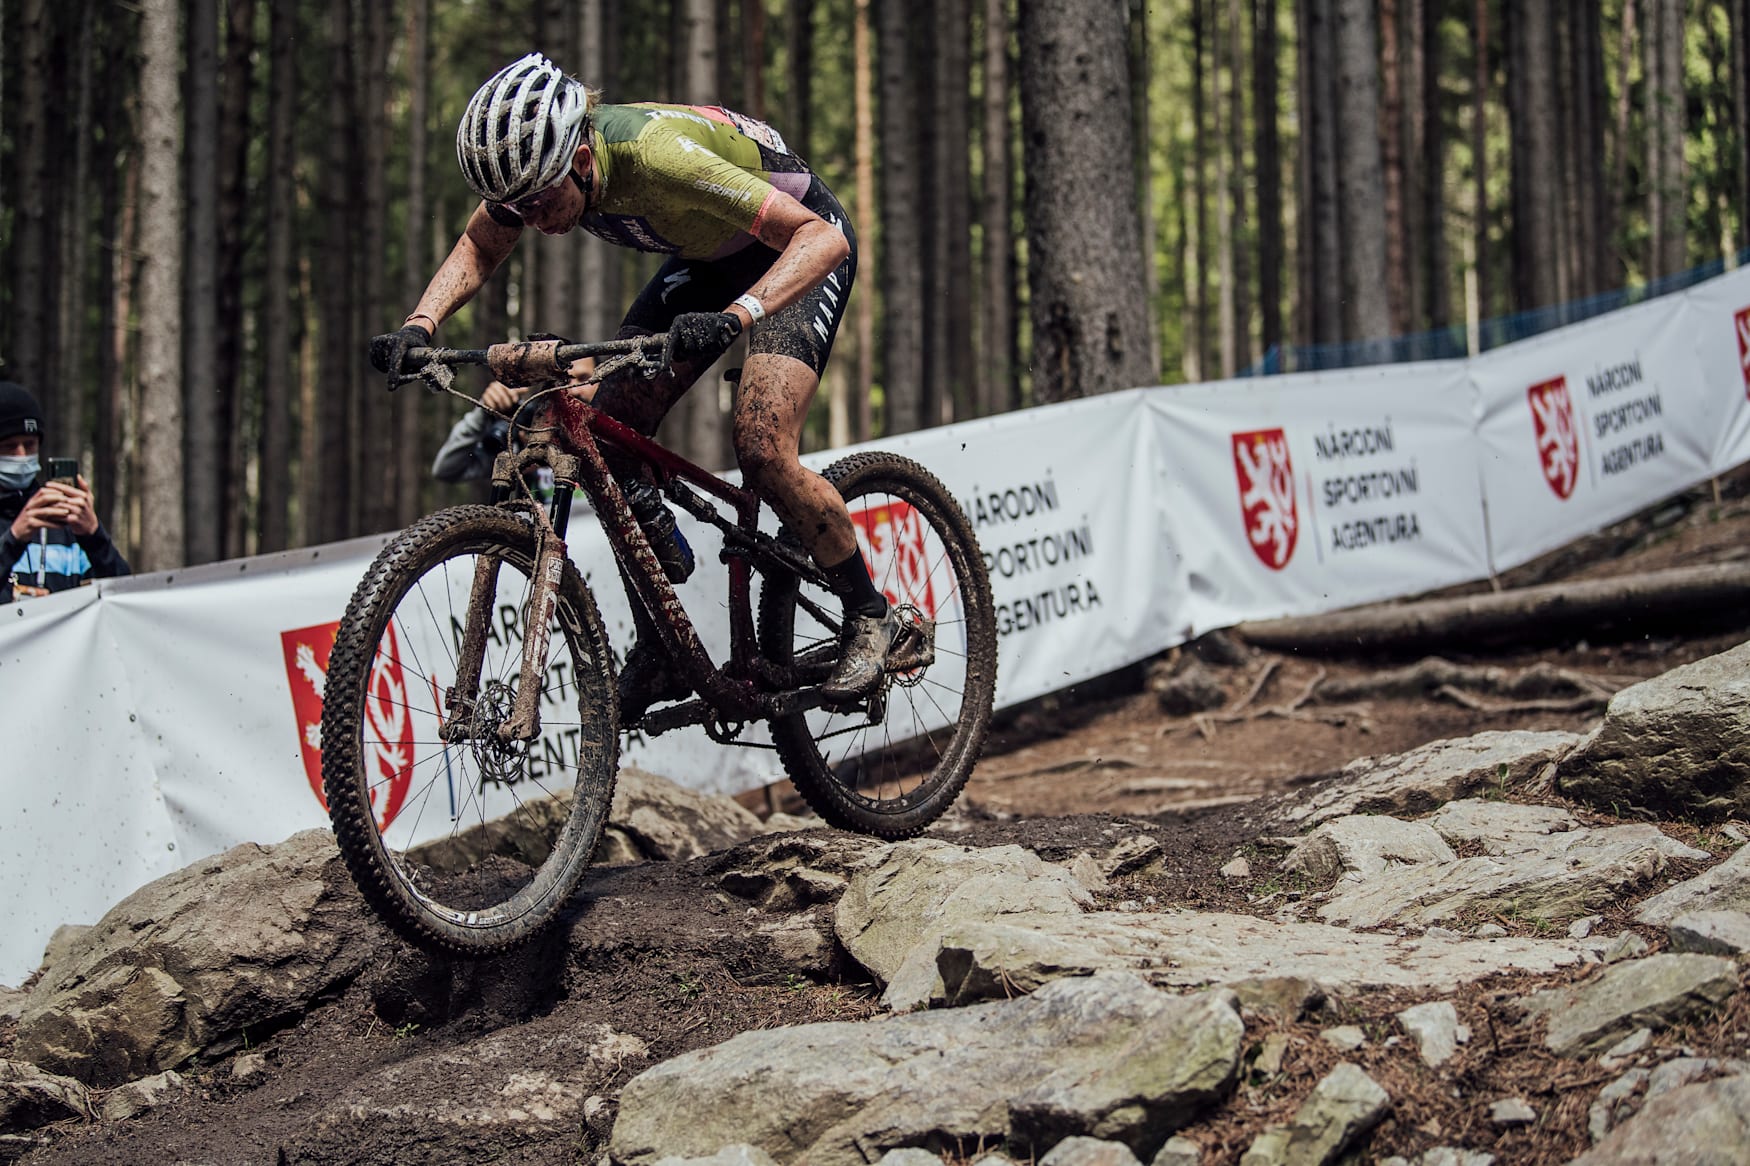 Haley Batten performs at UCI XCO in Nove Mesto na Morave, Czech Republic on May 16th, 2021.